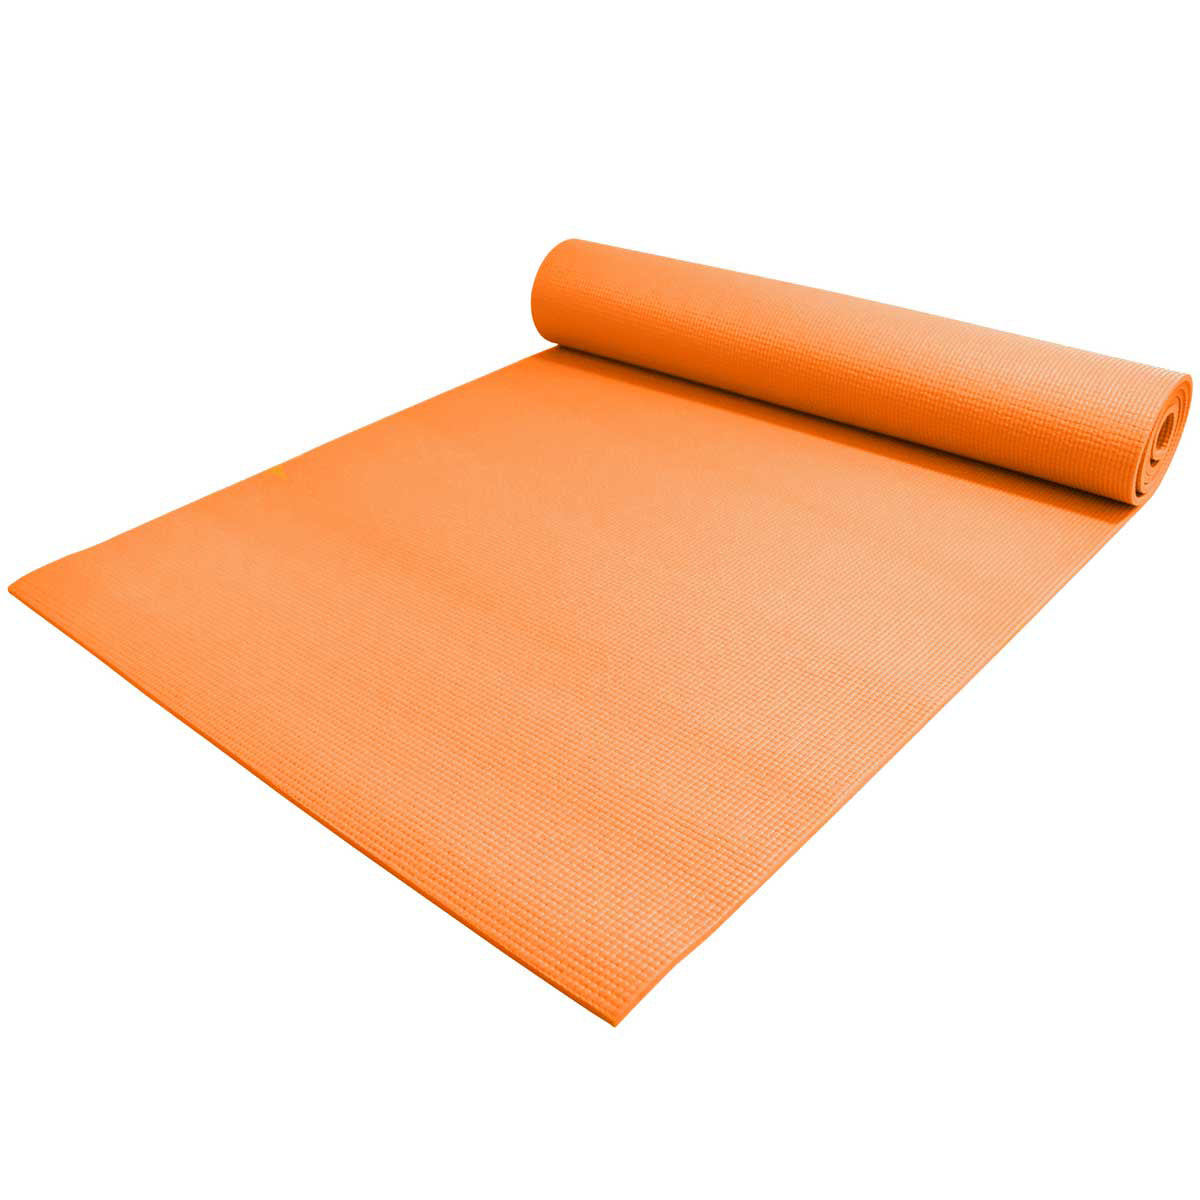 OIO Large yoga mat set extra wide long 4x6 for men India